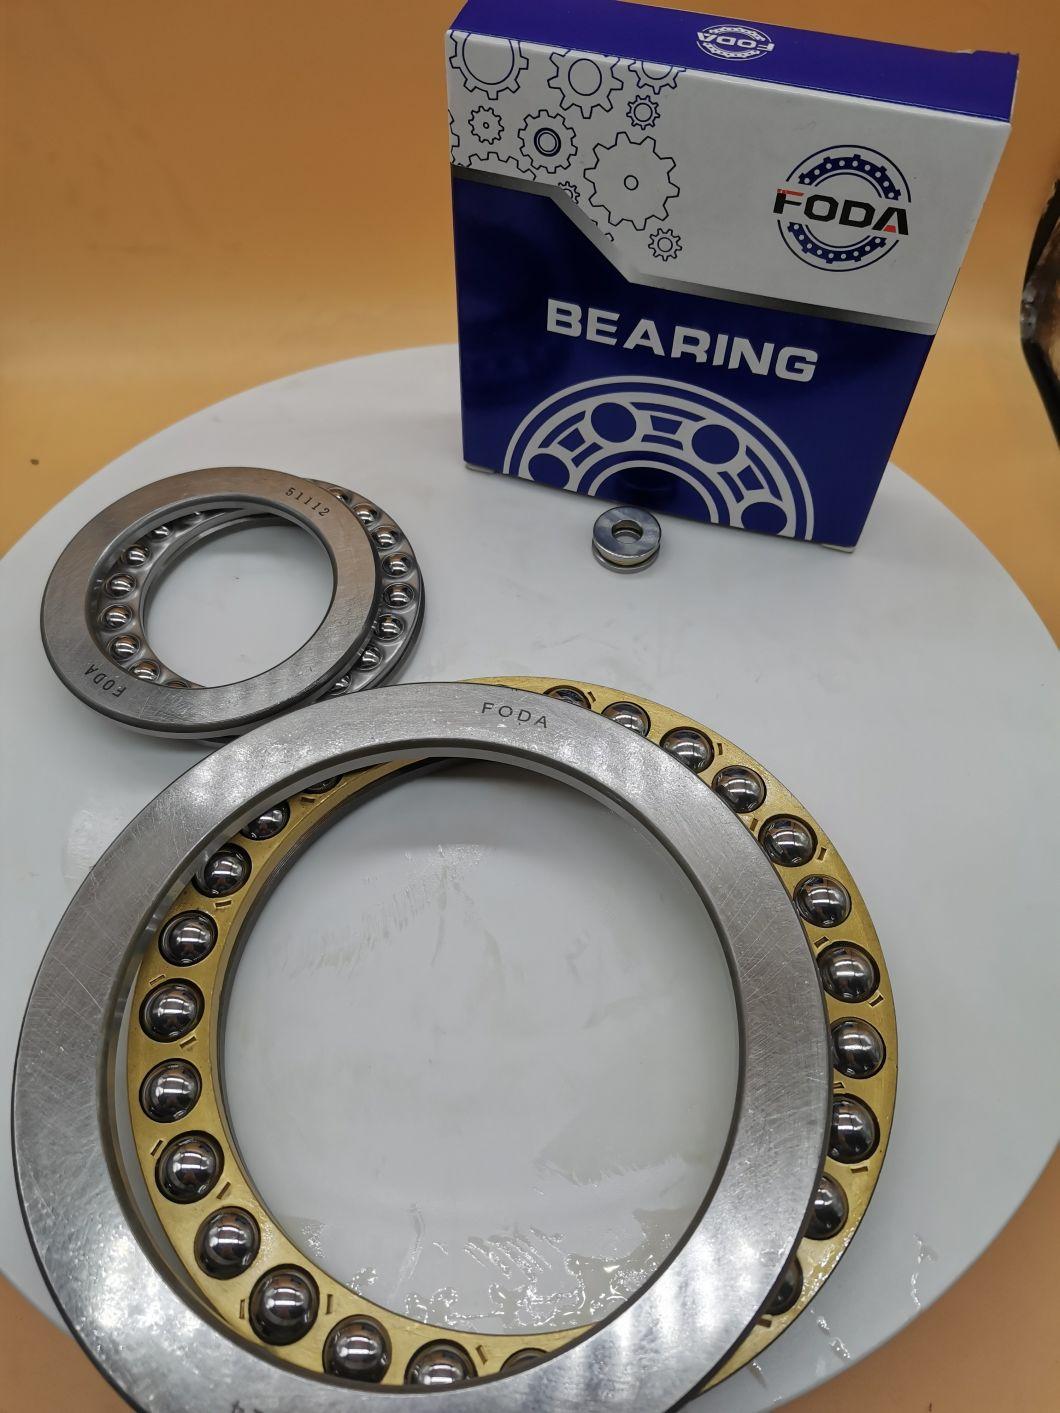 Unidirectional Thrust Ball Bearings/Low Speed Reducer/Foda High Quality Bearings Instead of Koyo Bearings/Thrust Ball Bearings of 51408